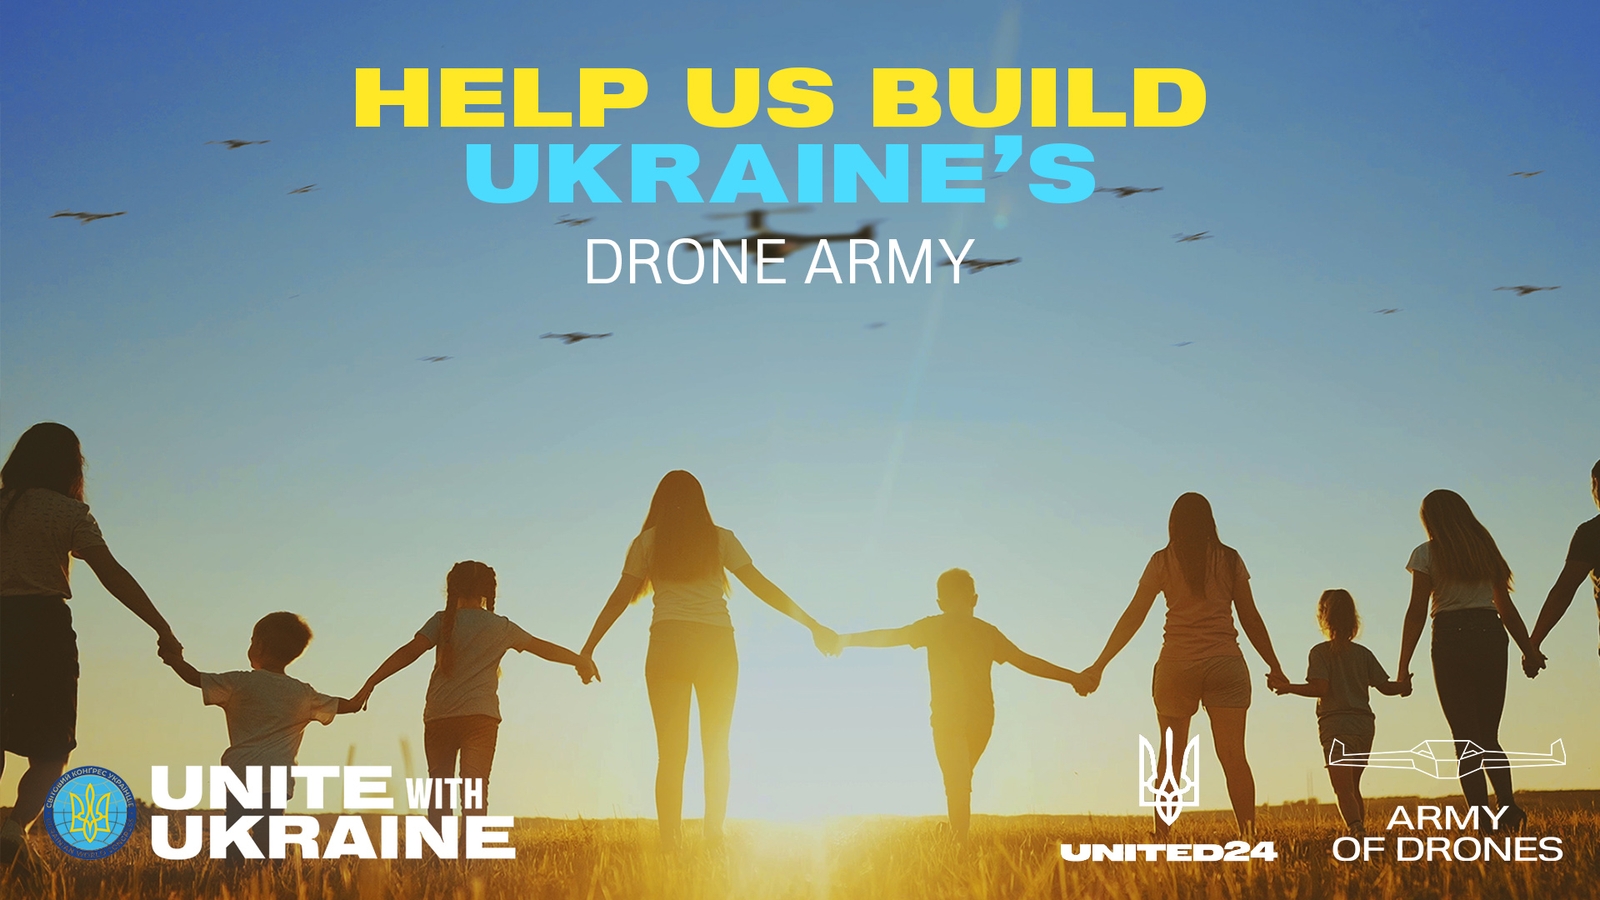 The Ukrainian World Congress has Called on Communities to Give an Army of Drones to Ukraine as a Gift